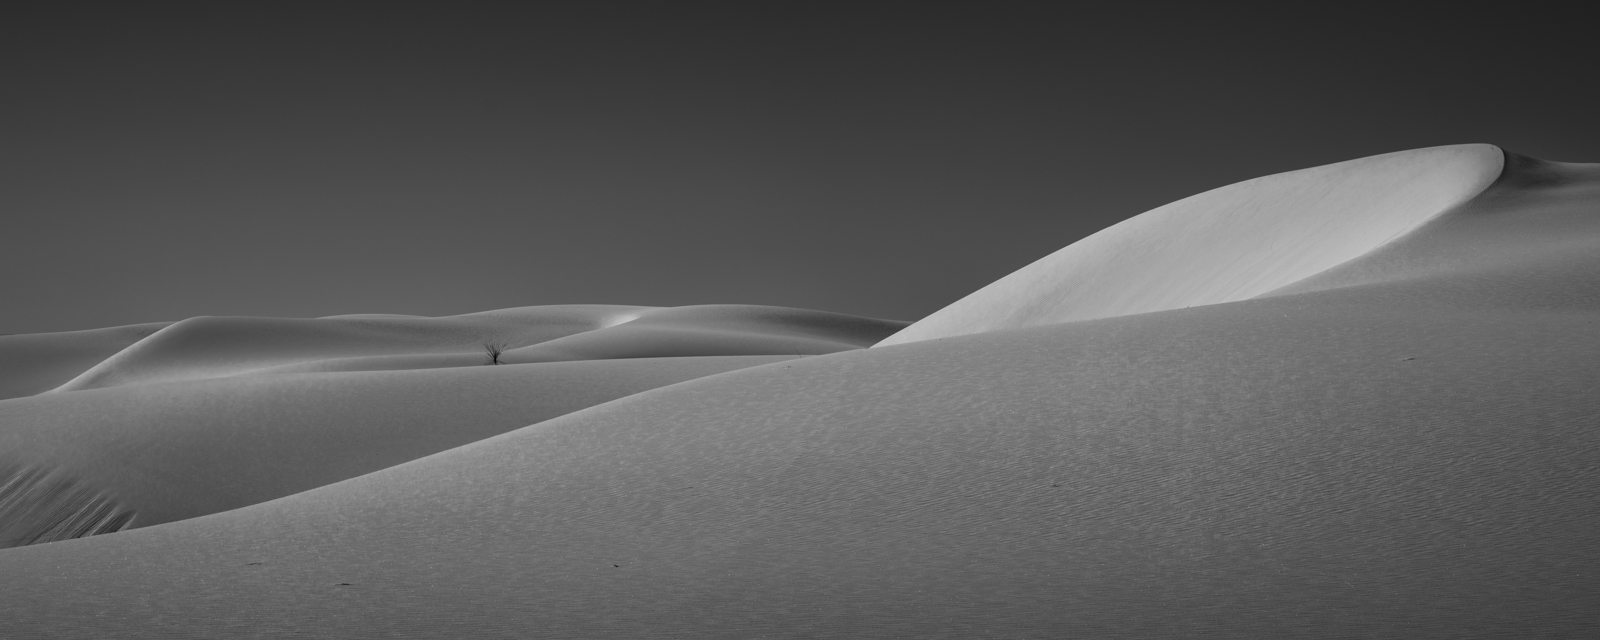 Like soft whispers, the white dunes curve and stretch into the distance, with the subtle presence of a lone plant adding scale...